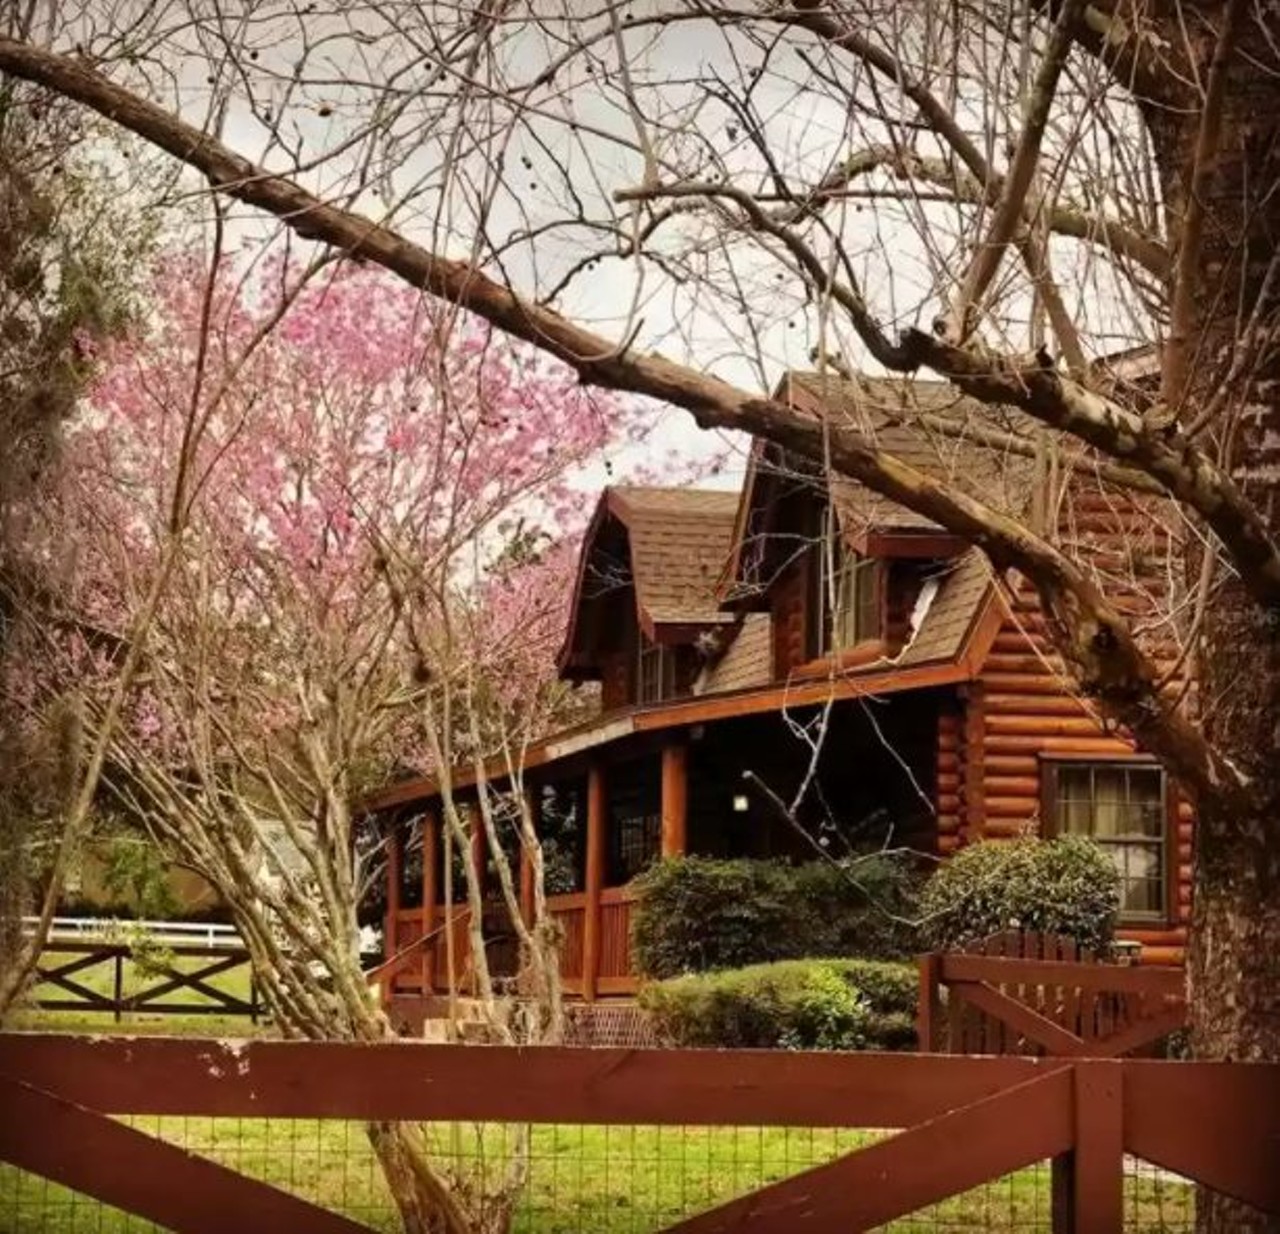 This Montverde log cabin/yoga retreat comes with a free Tesla